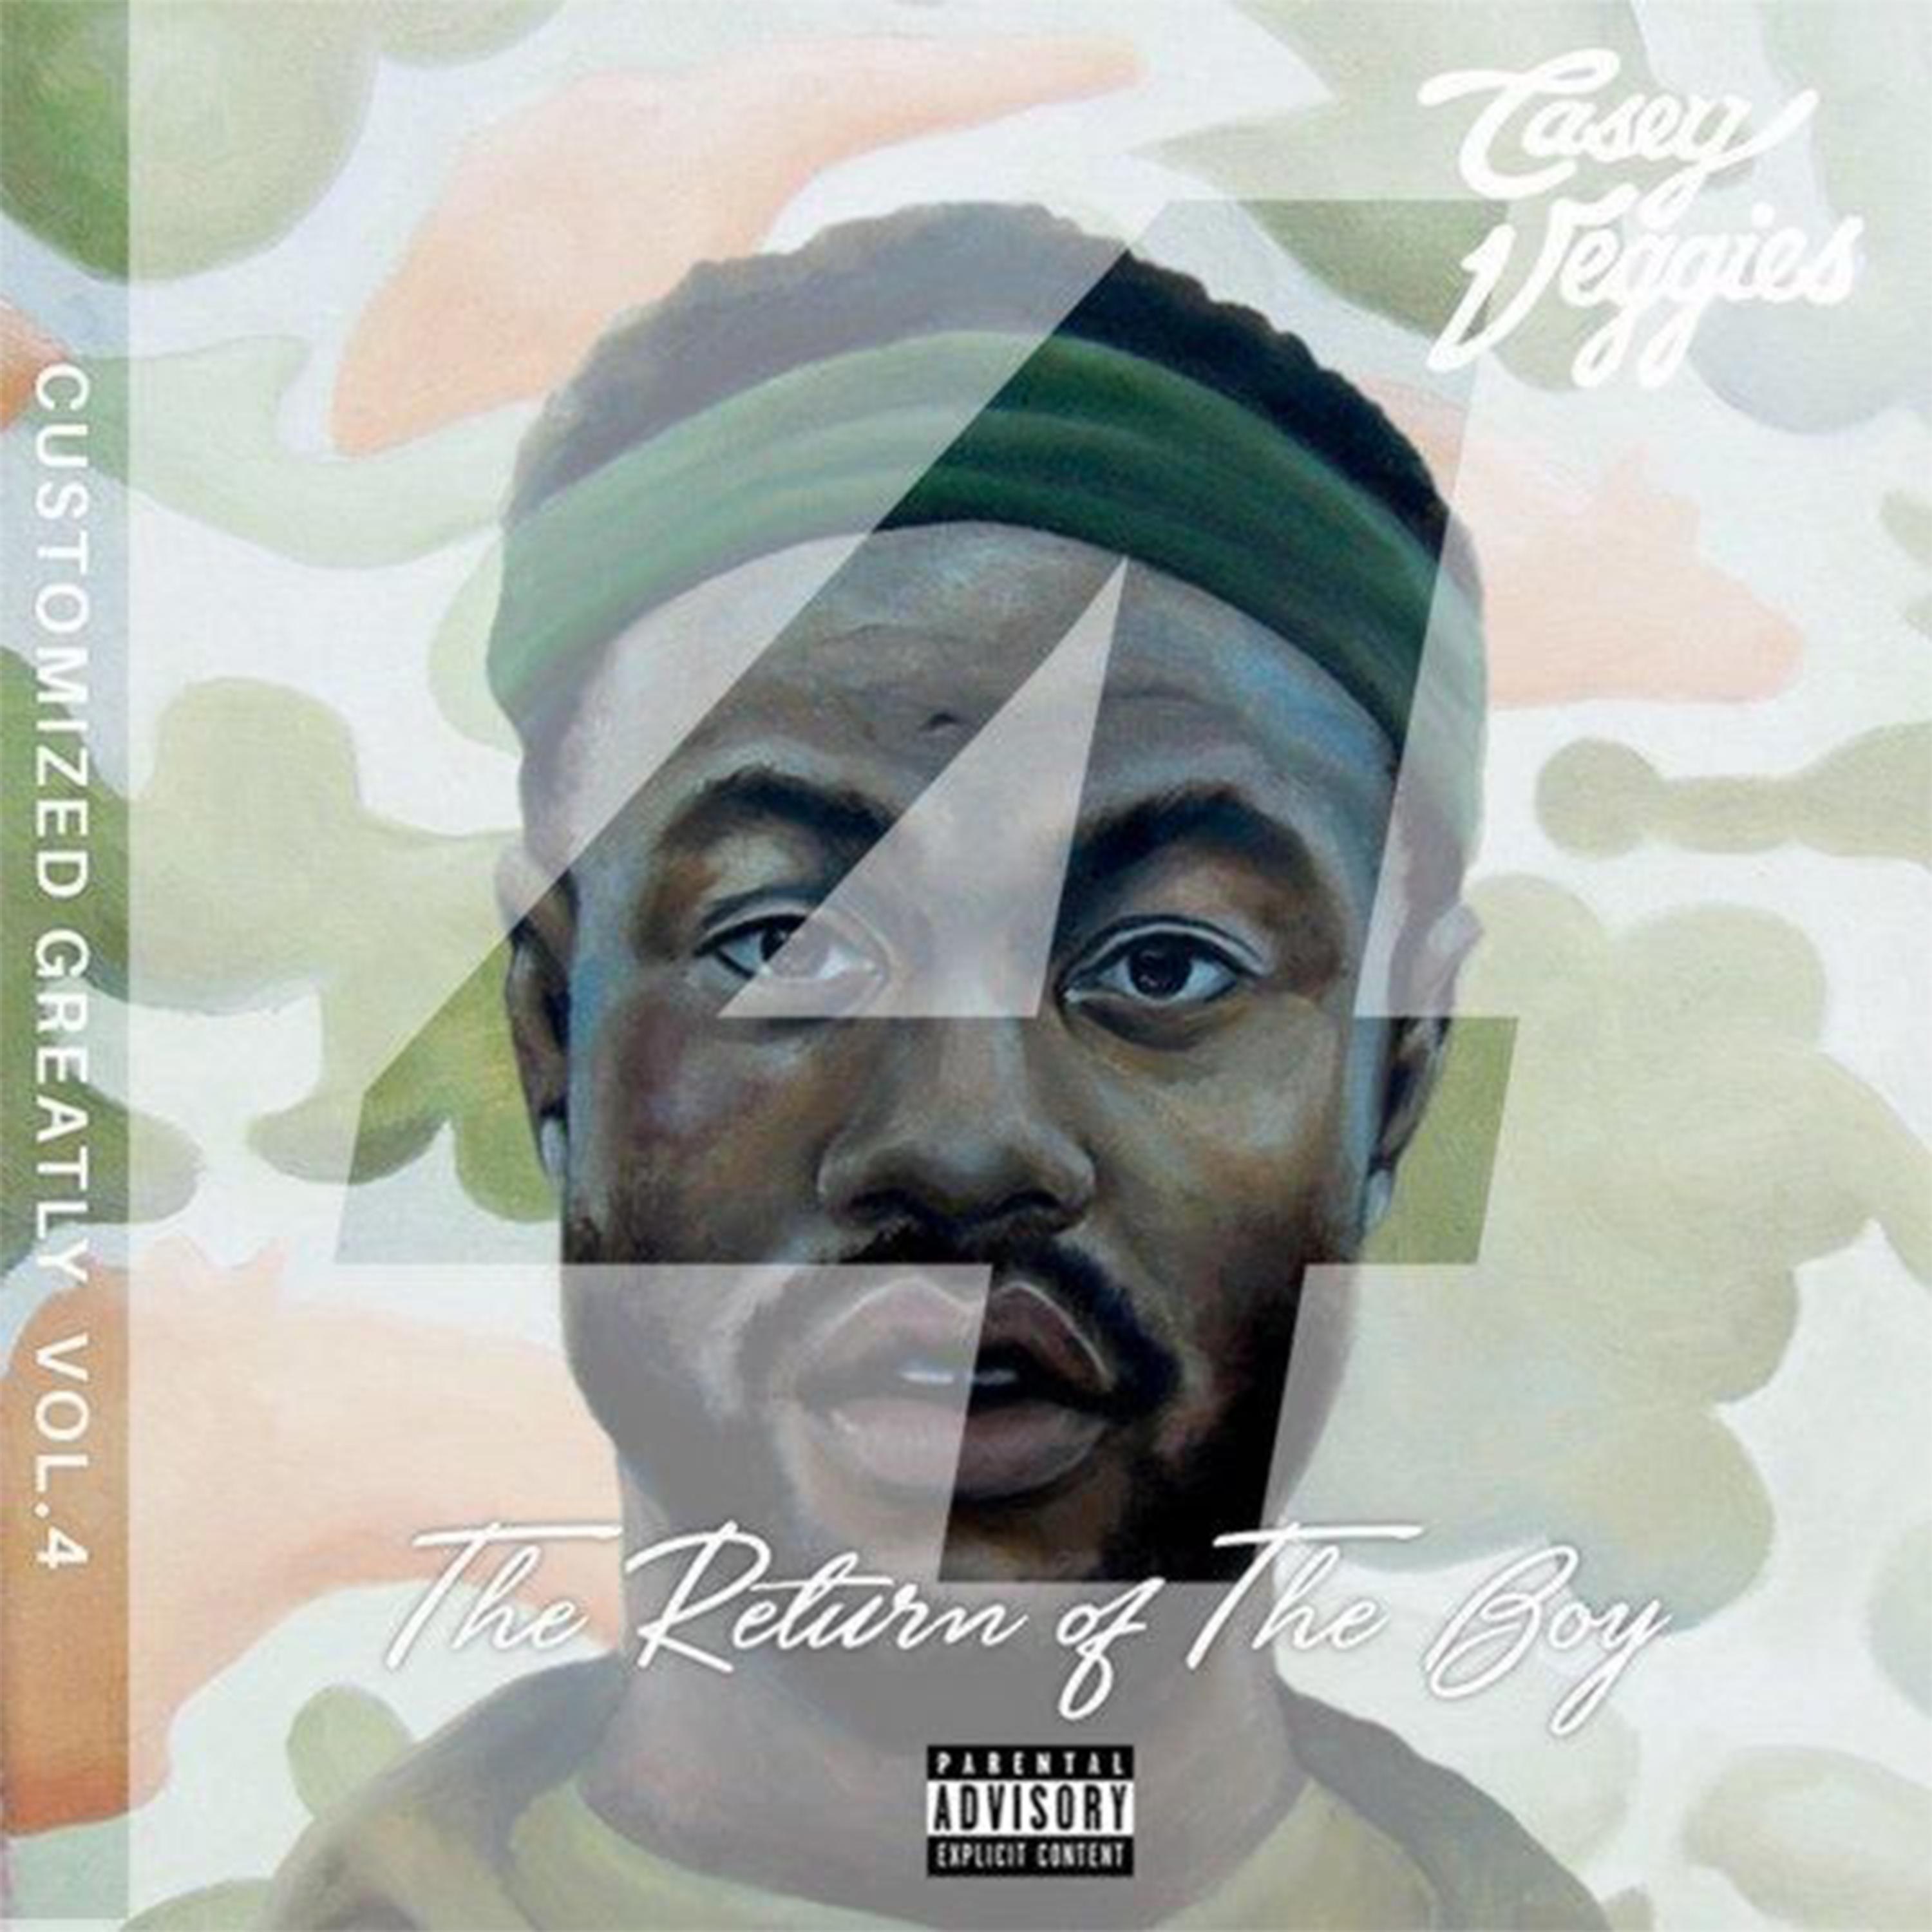 Customized Greatly Vol. 4: The Return of The Boy